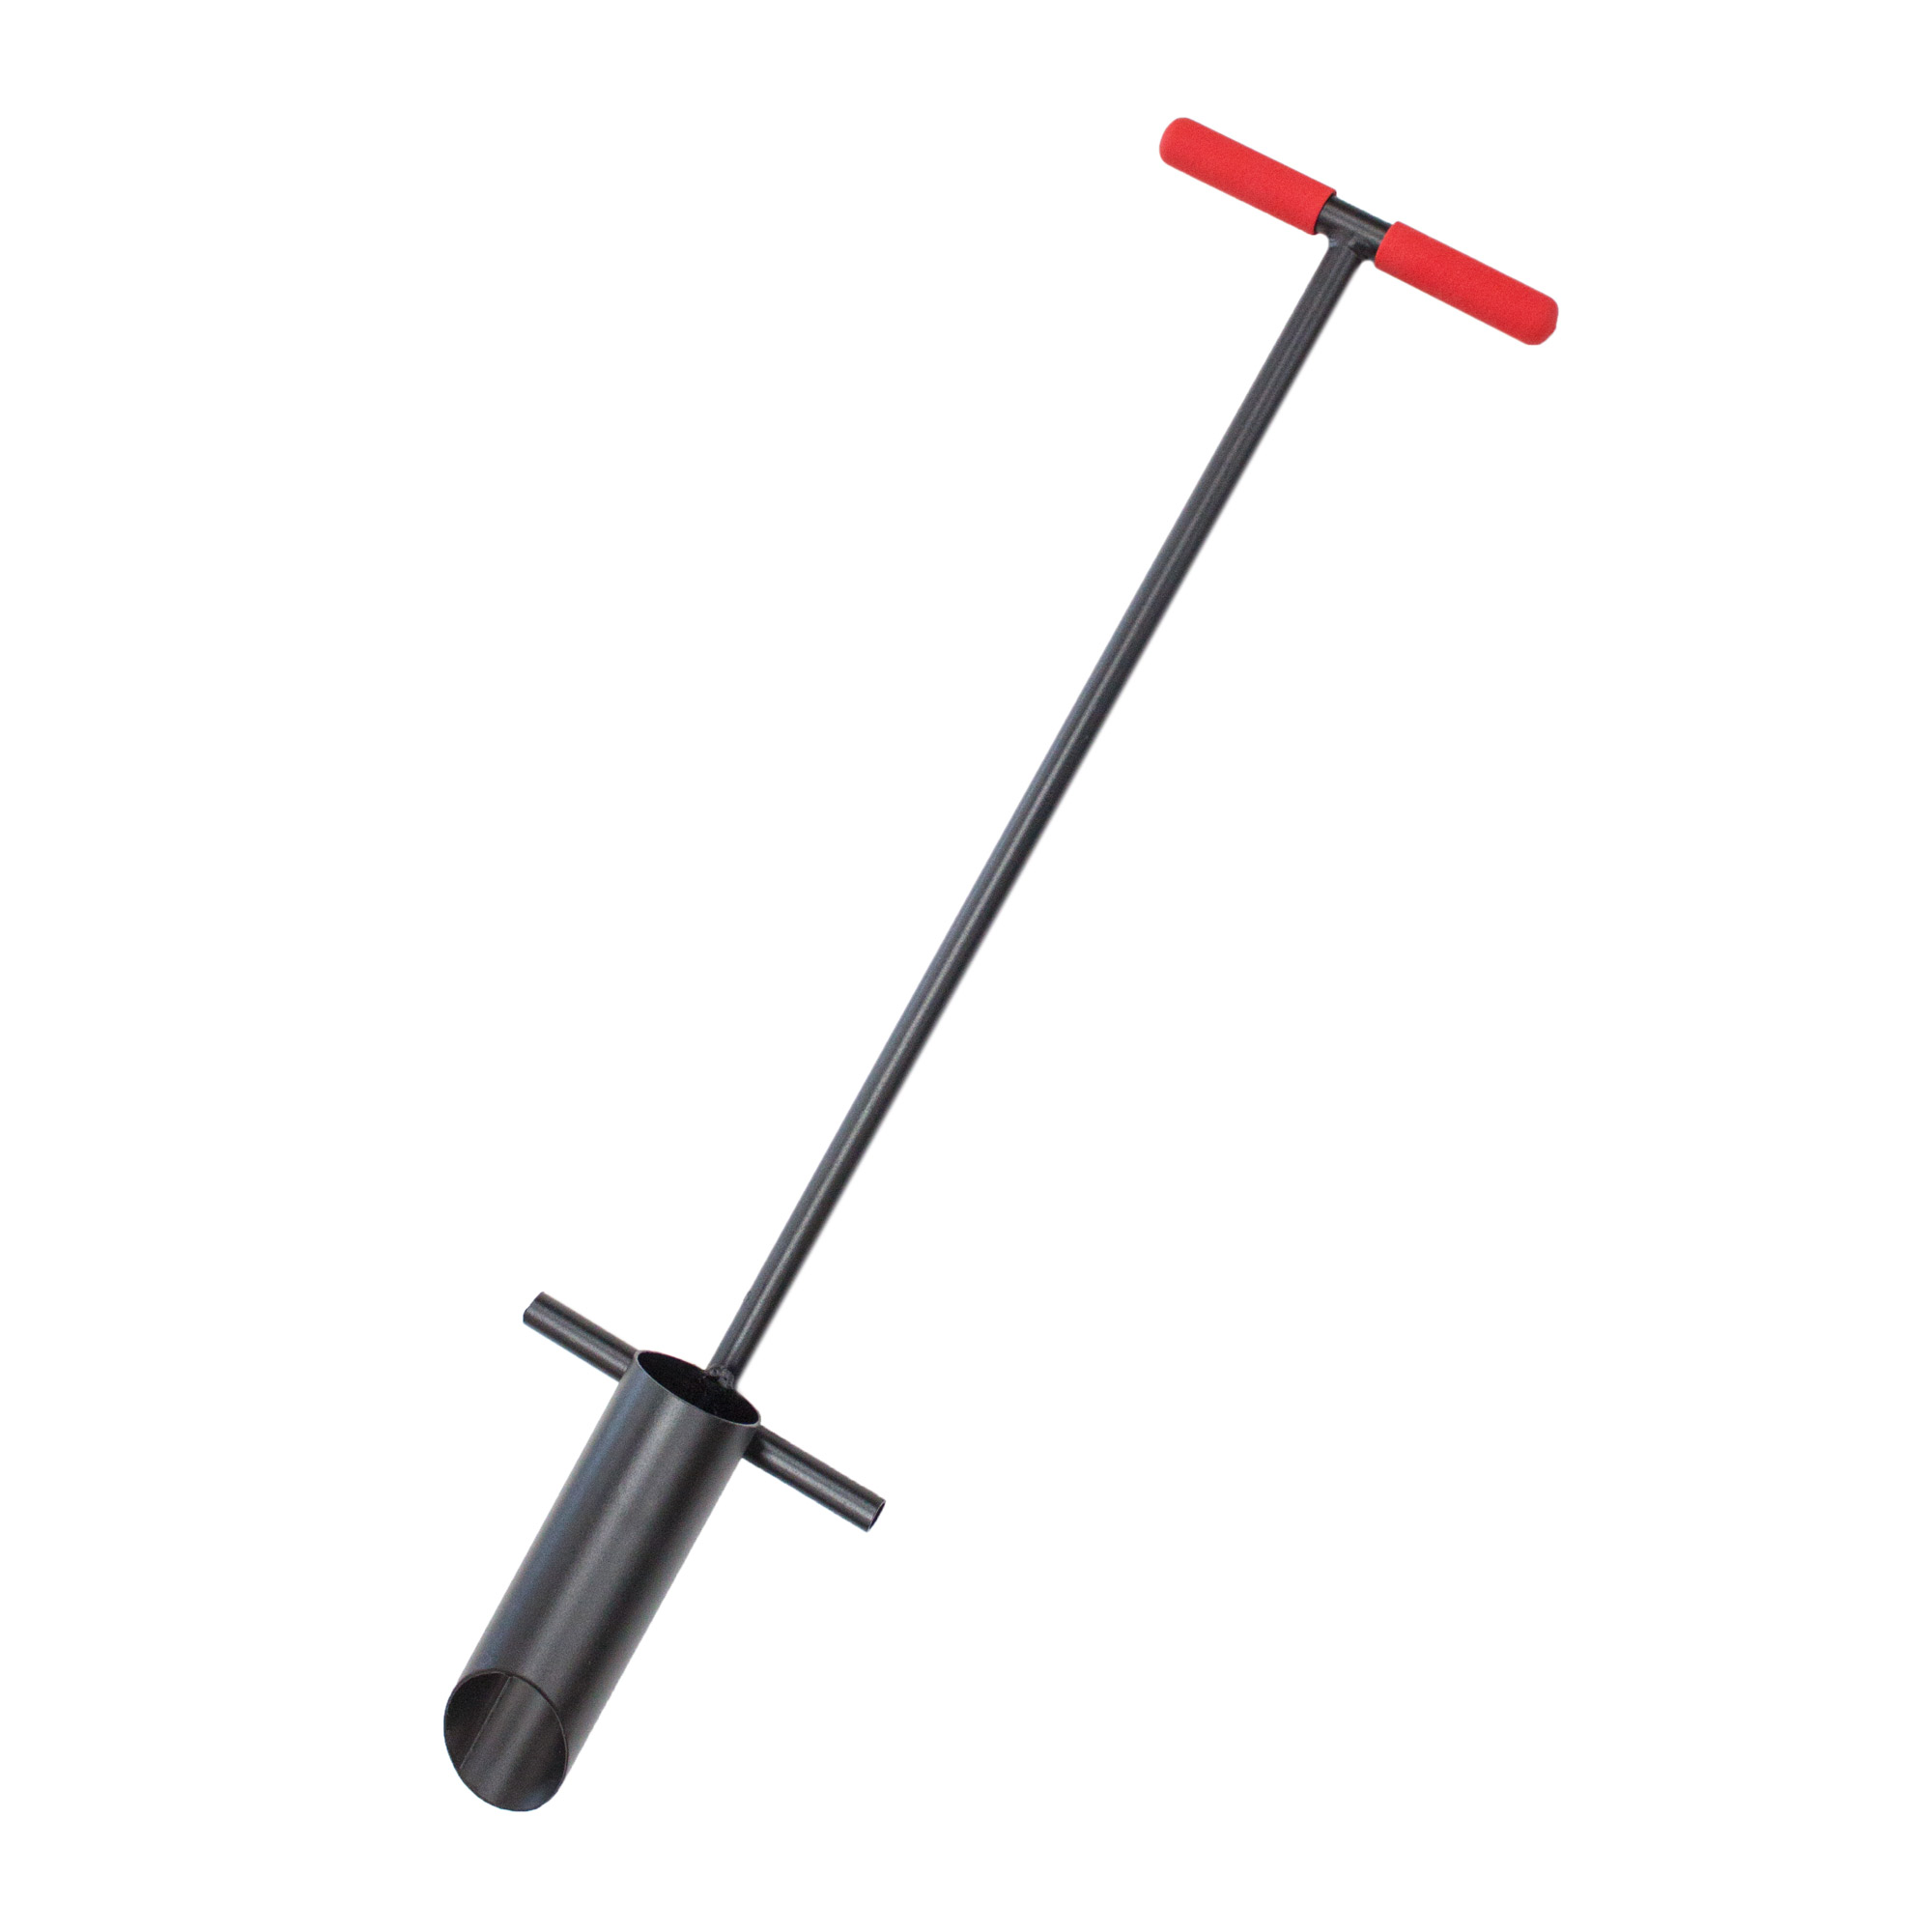 3-Inch Diameter Bulb Planter with T-Style Handle - Bully Tools, Inc.